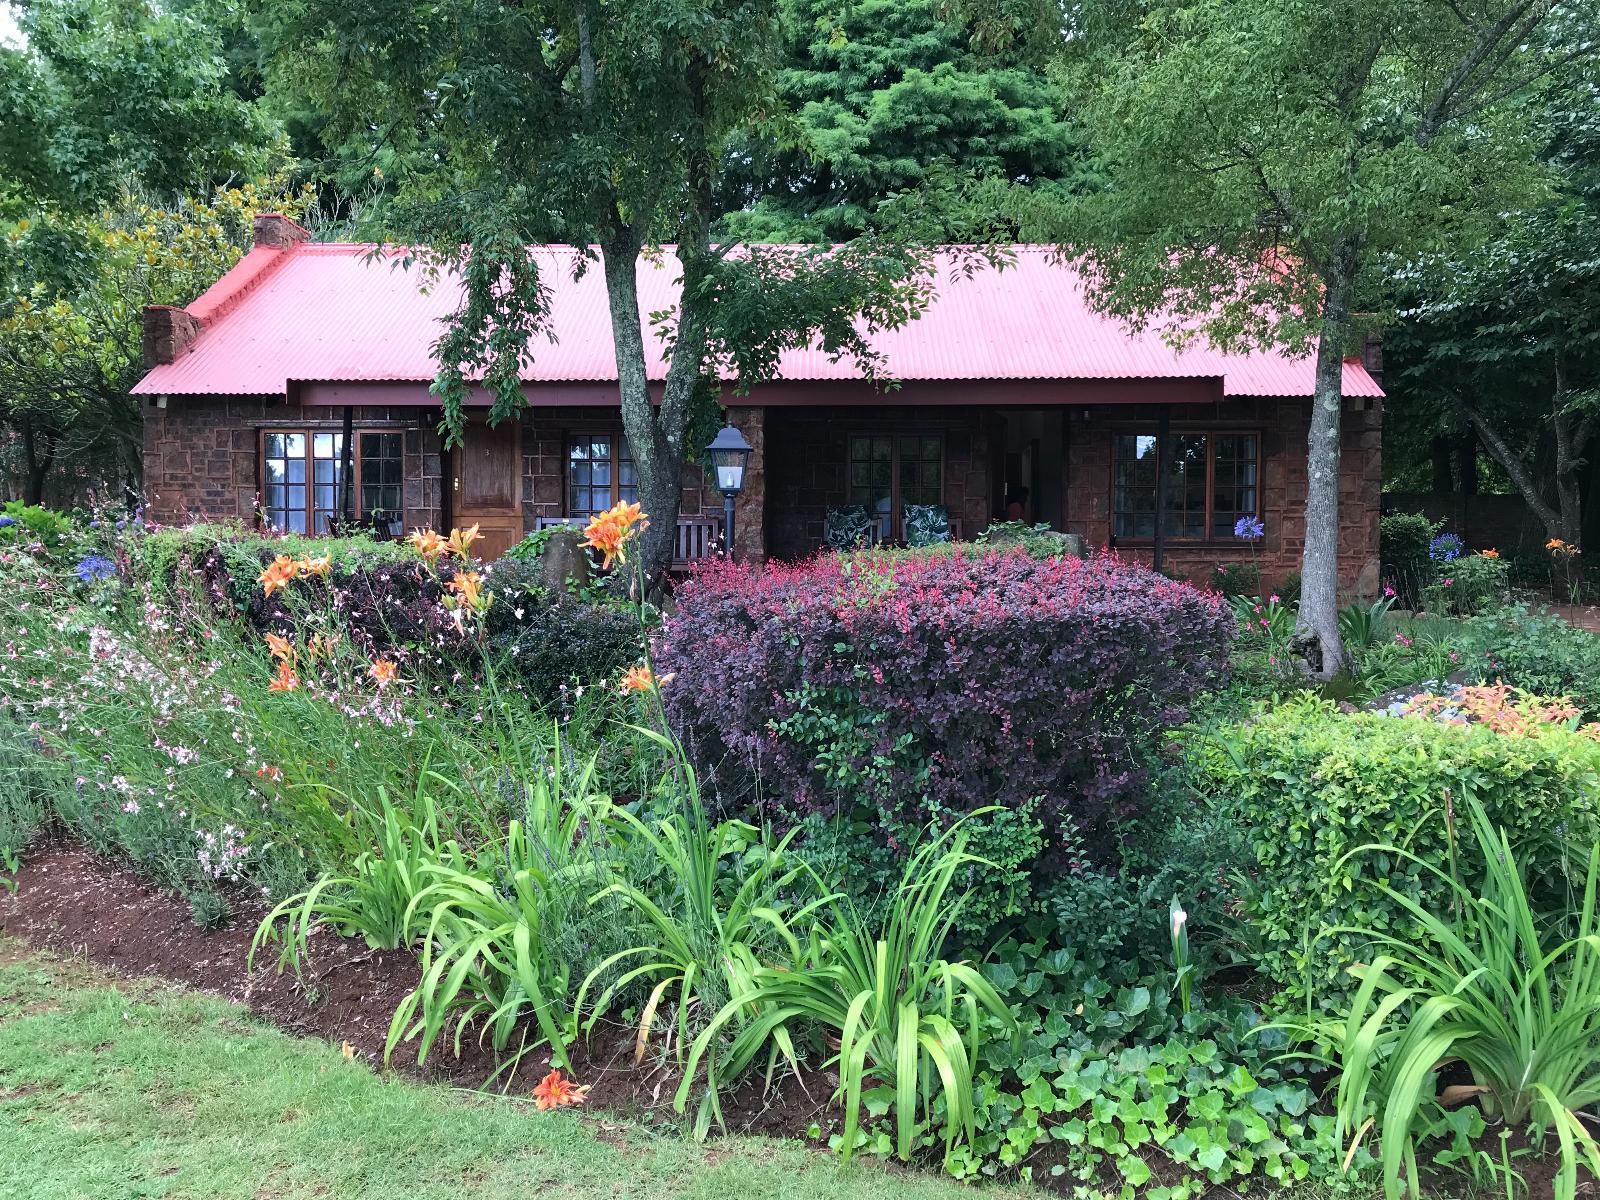 Lakeside Chalets 3 And 4 Critchley Hackle Lodge Dullstroom Mpumalanga South Africa House, Building, Architecture, Plant, Nature, Garden